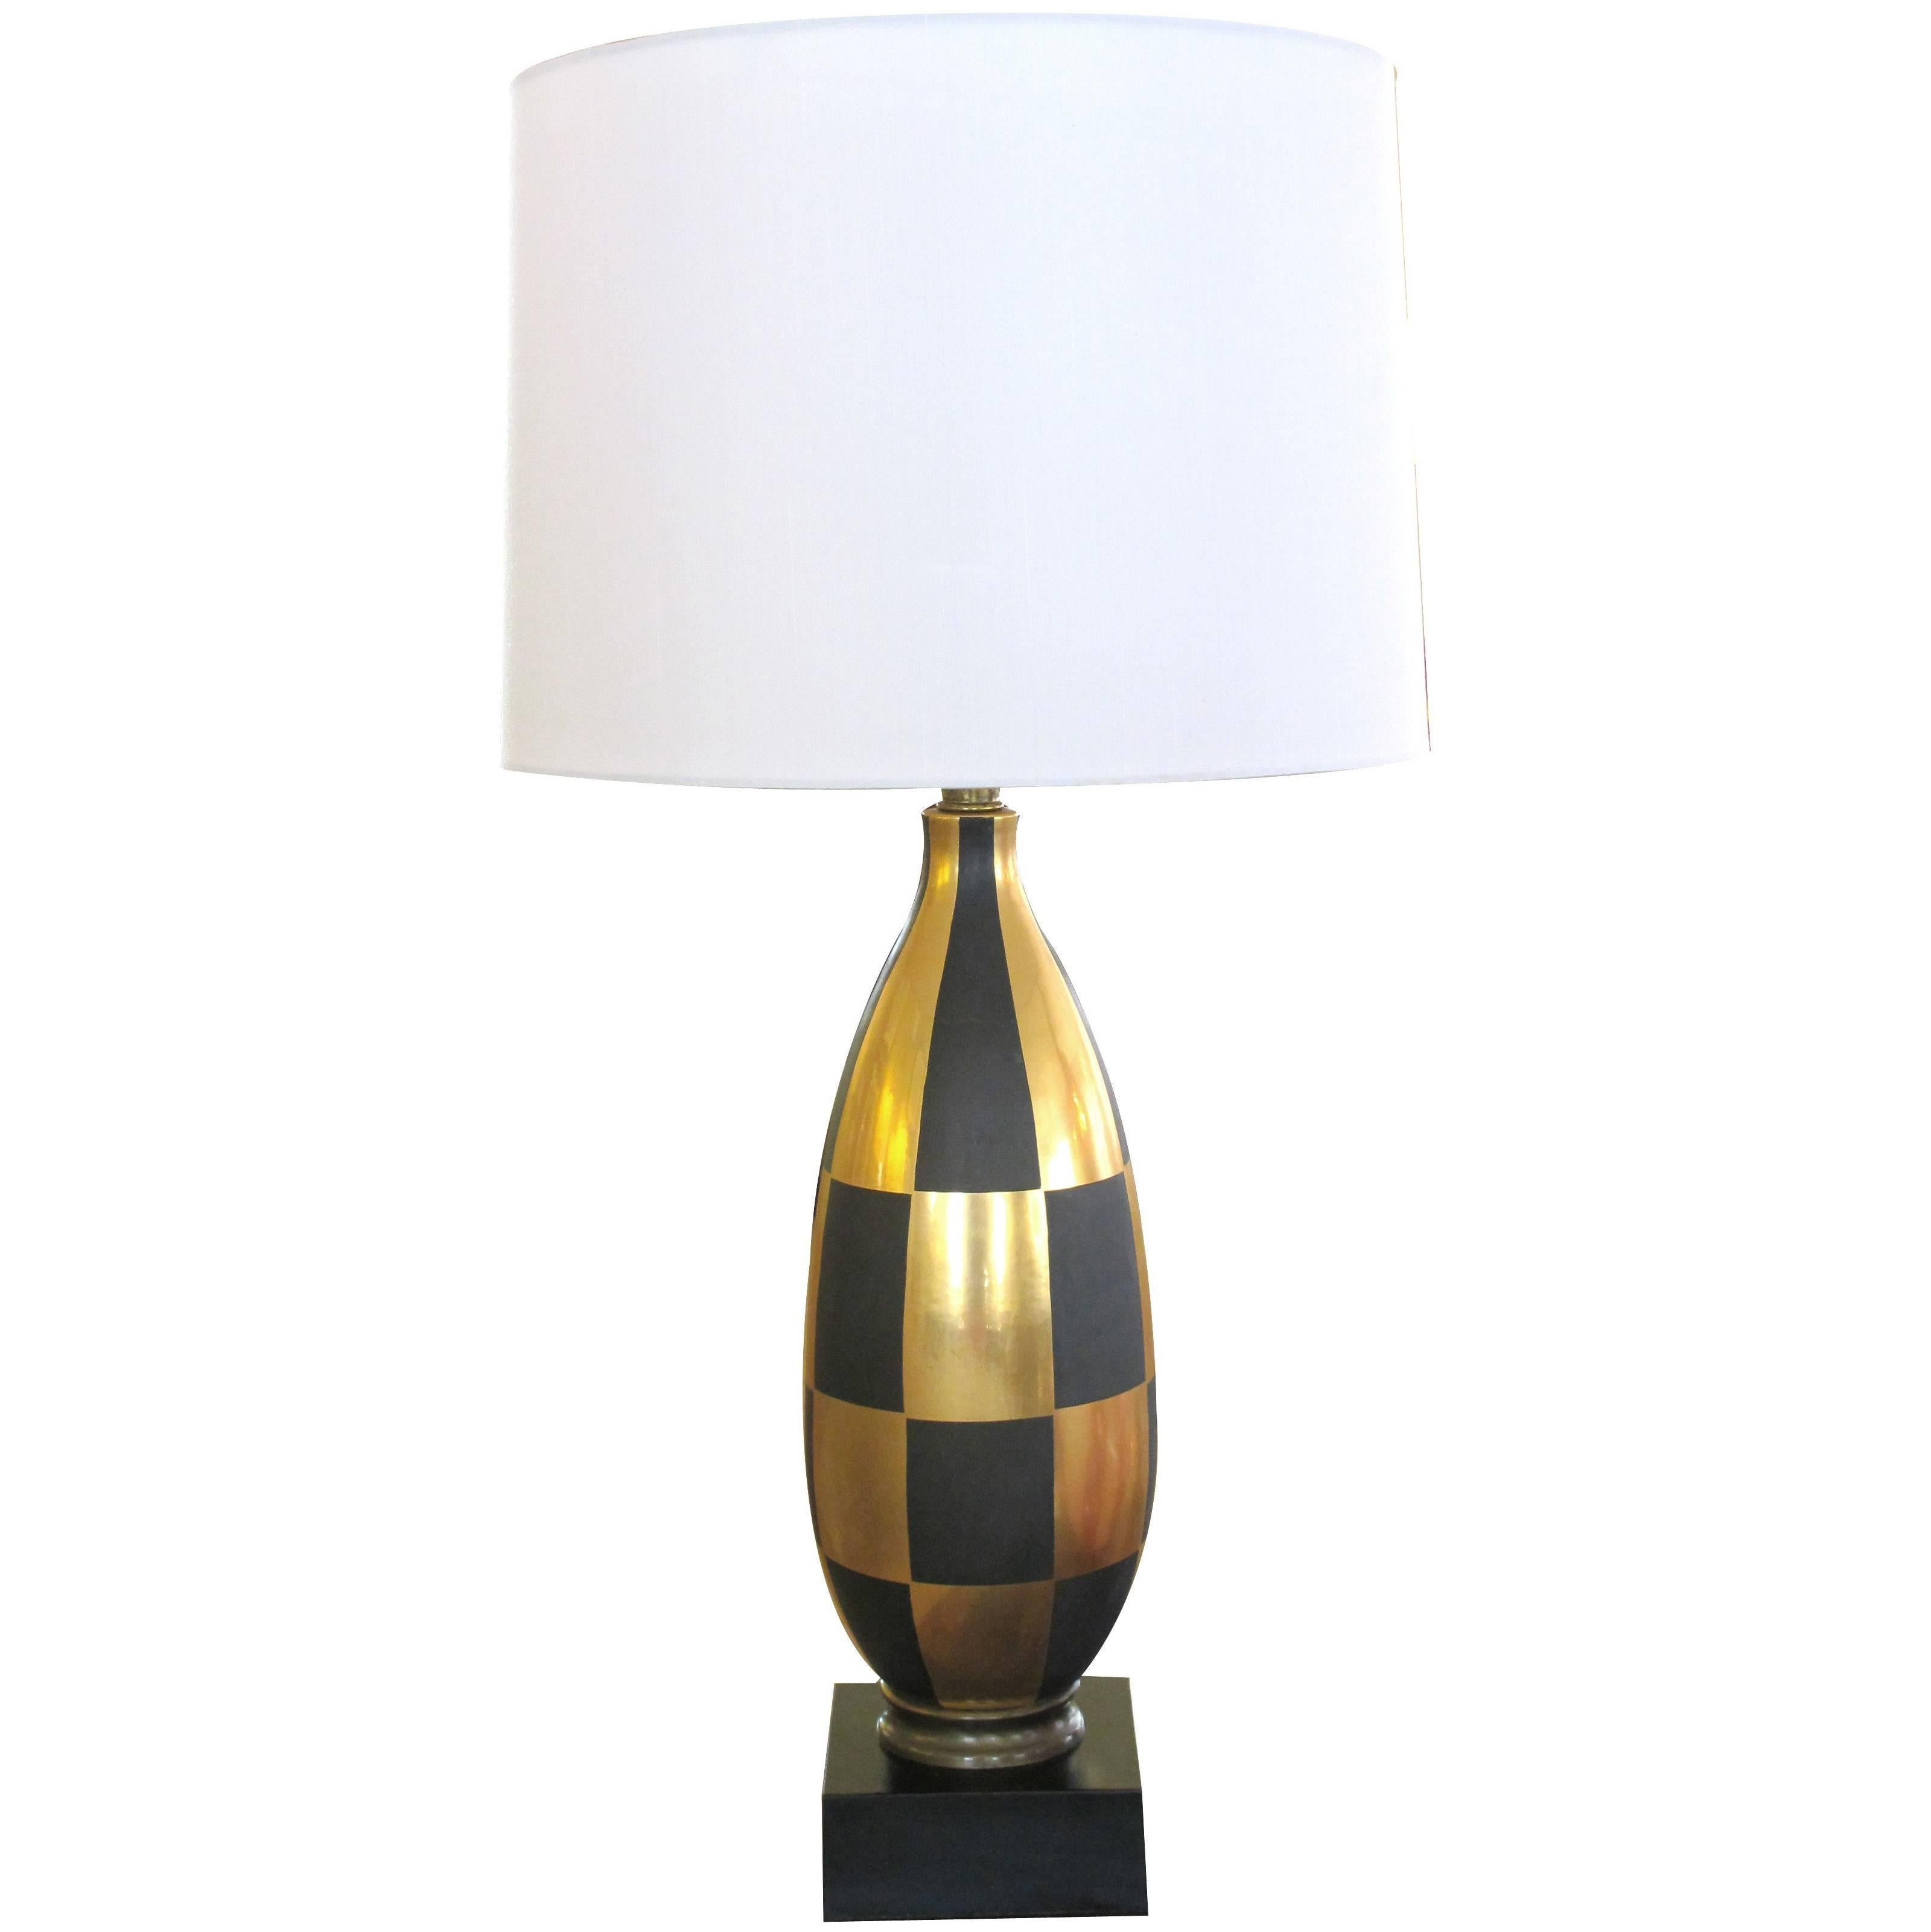 Stylish Italian 1960s Gold and Black Porcelain Lamp with Harlequin Design